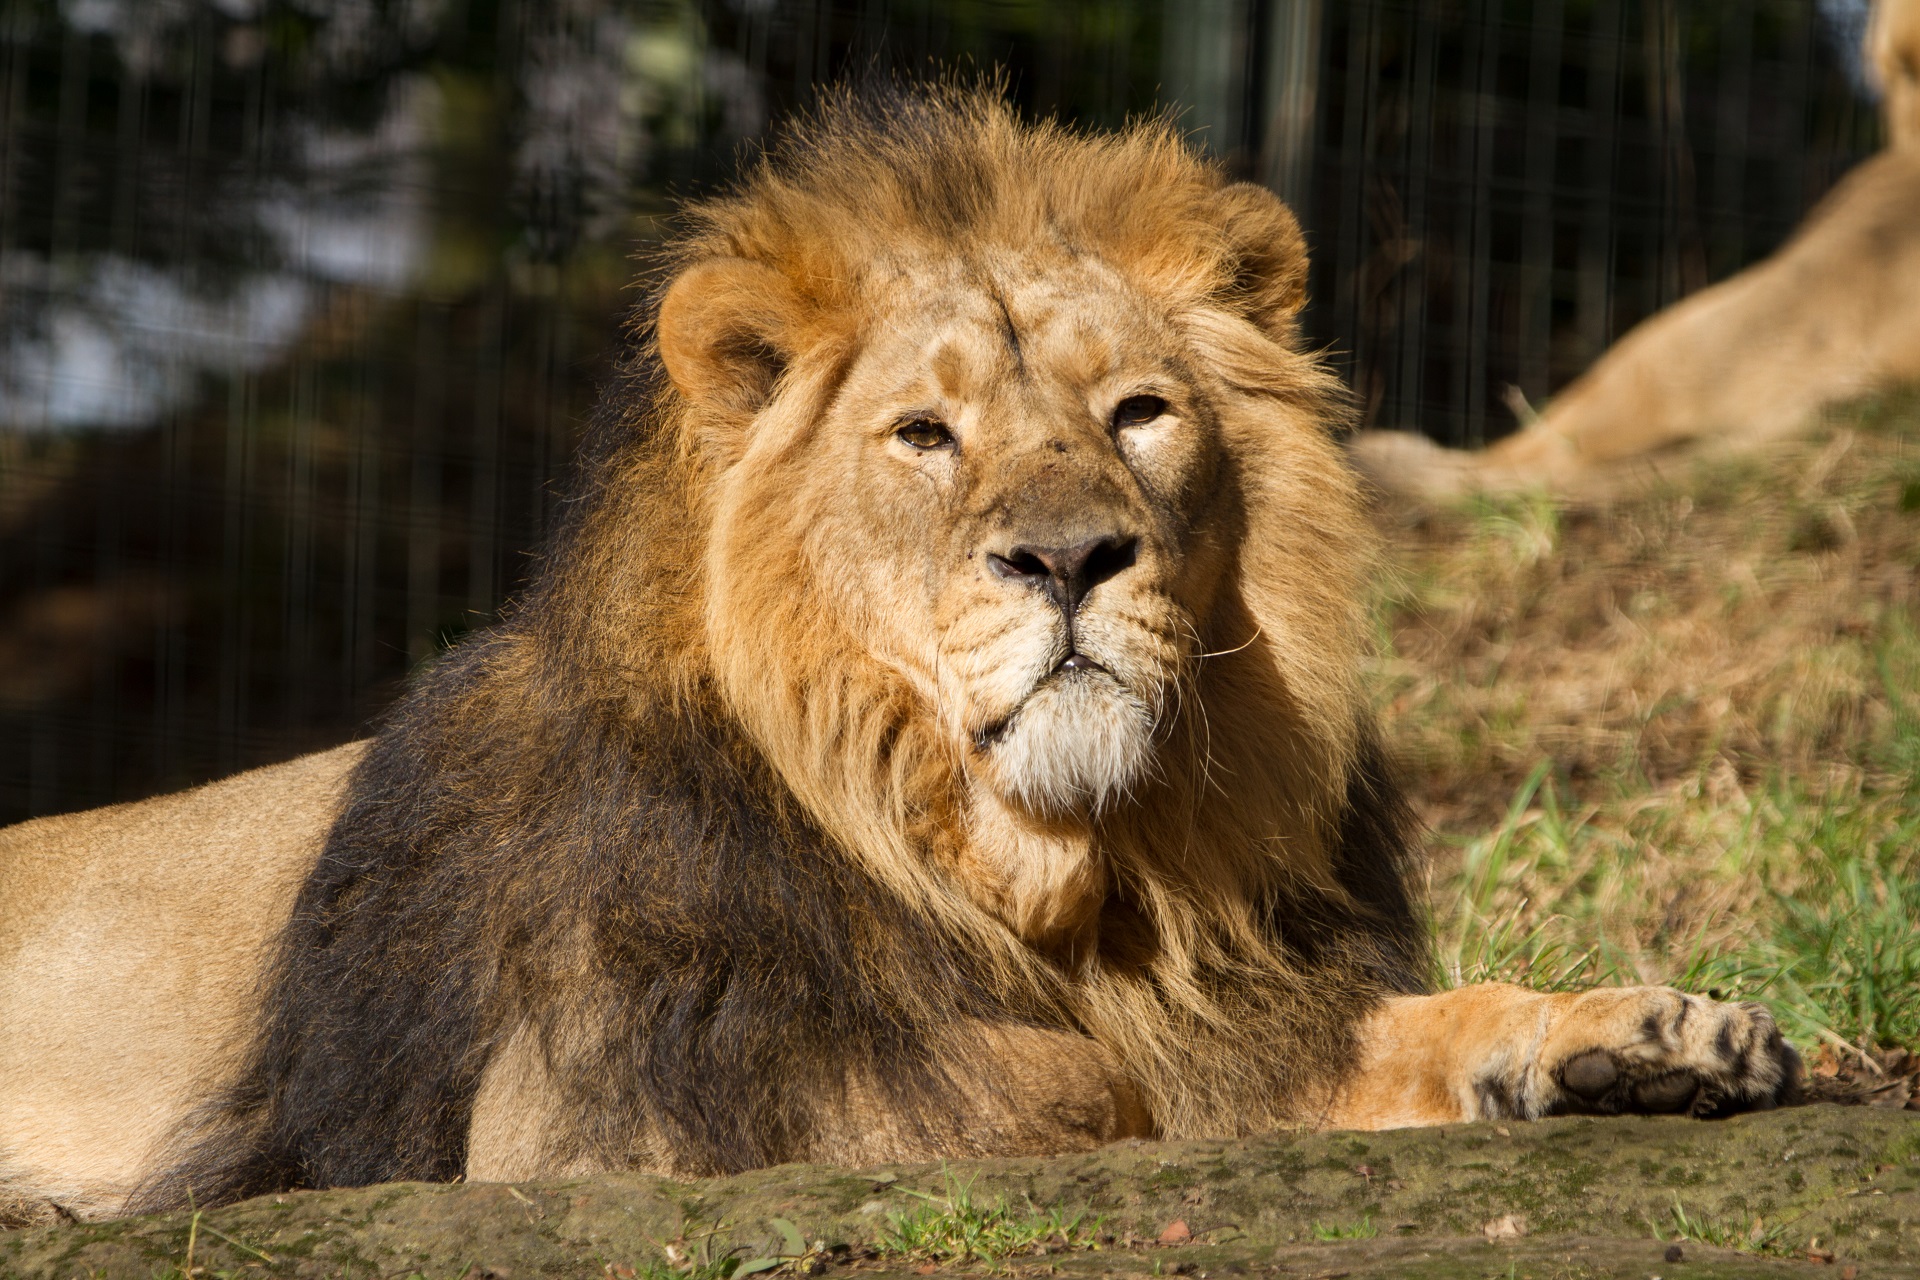 Asiatic lion Jayendra looking at the camera (eye contact). IMAGE: Laura Moore (2021)